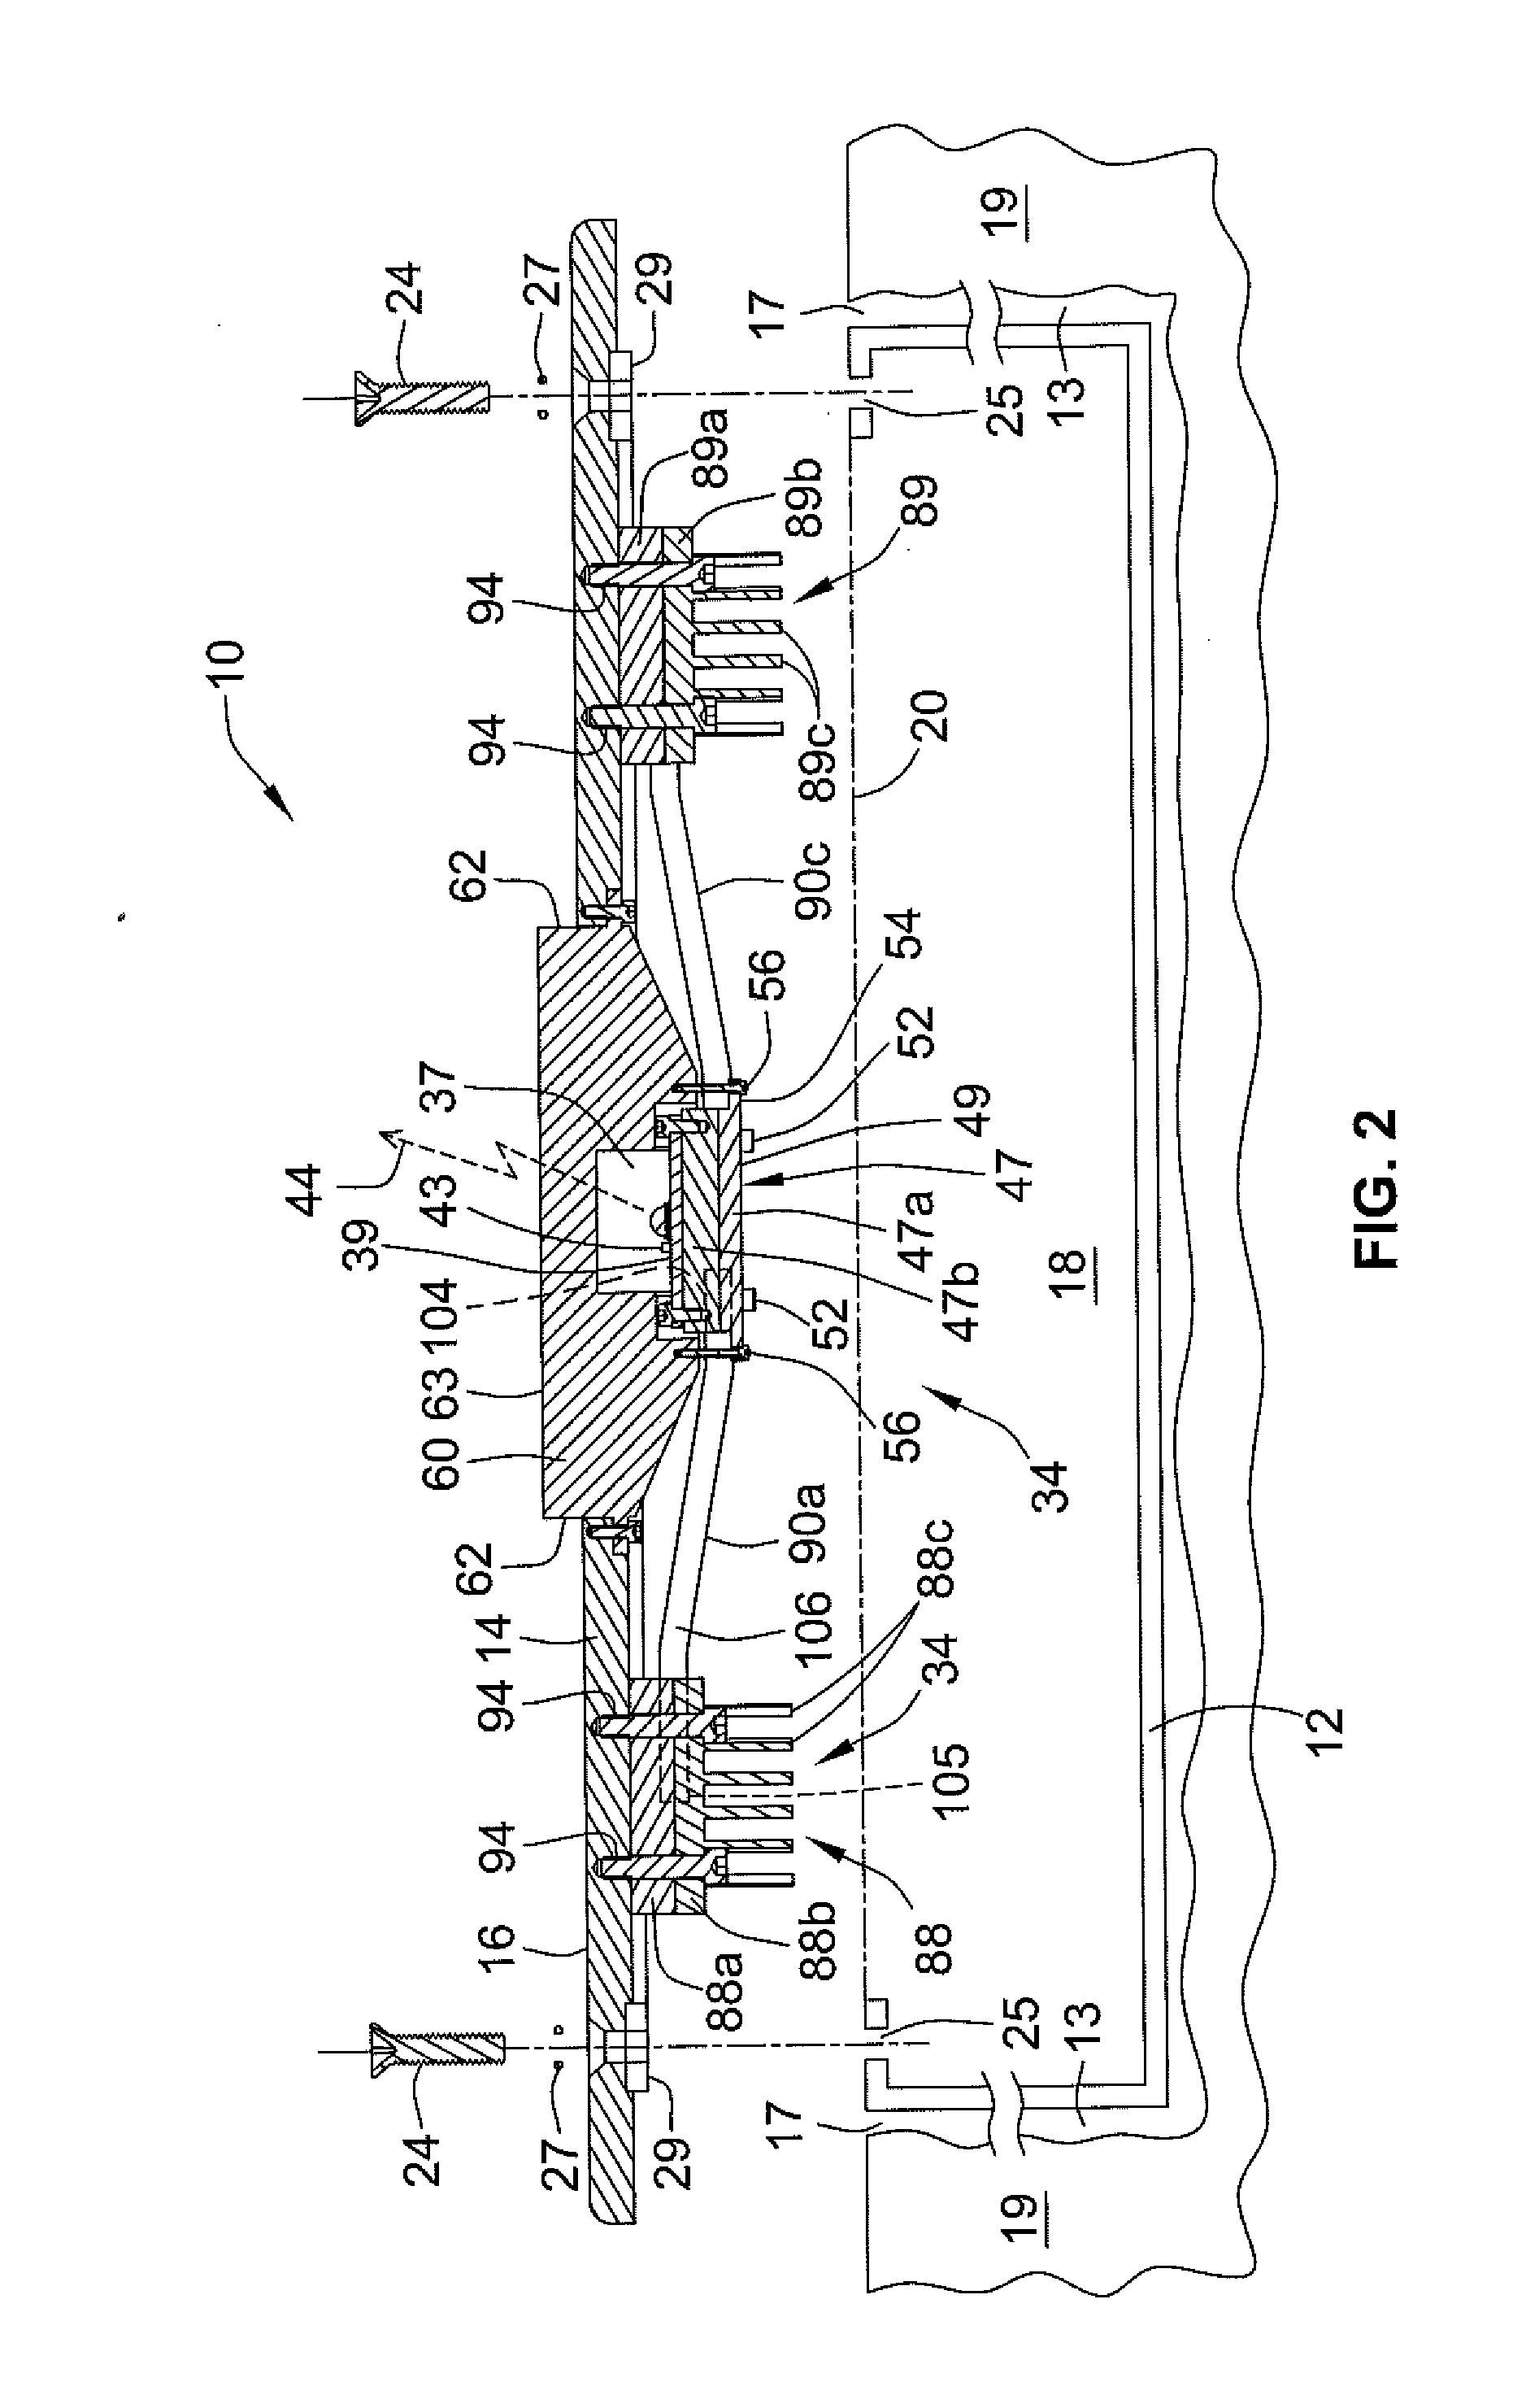 Thermally managed LED recessed lighting apparatus